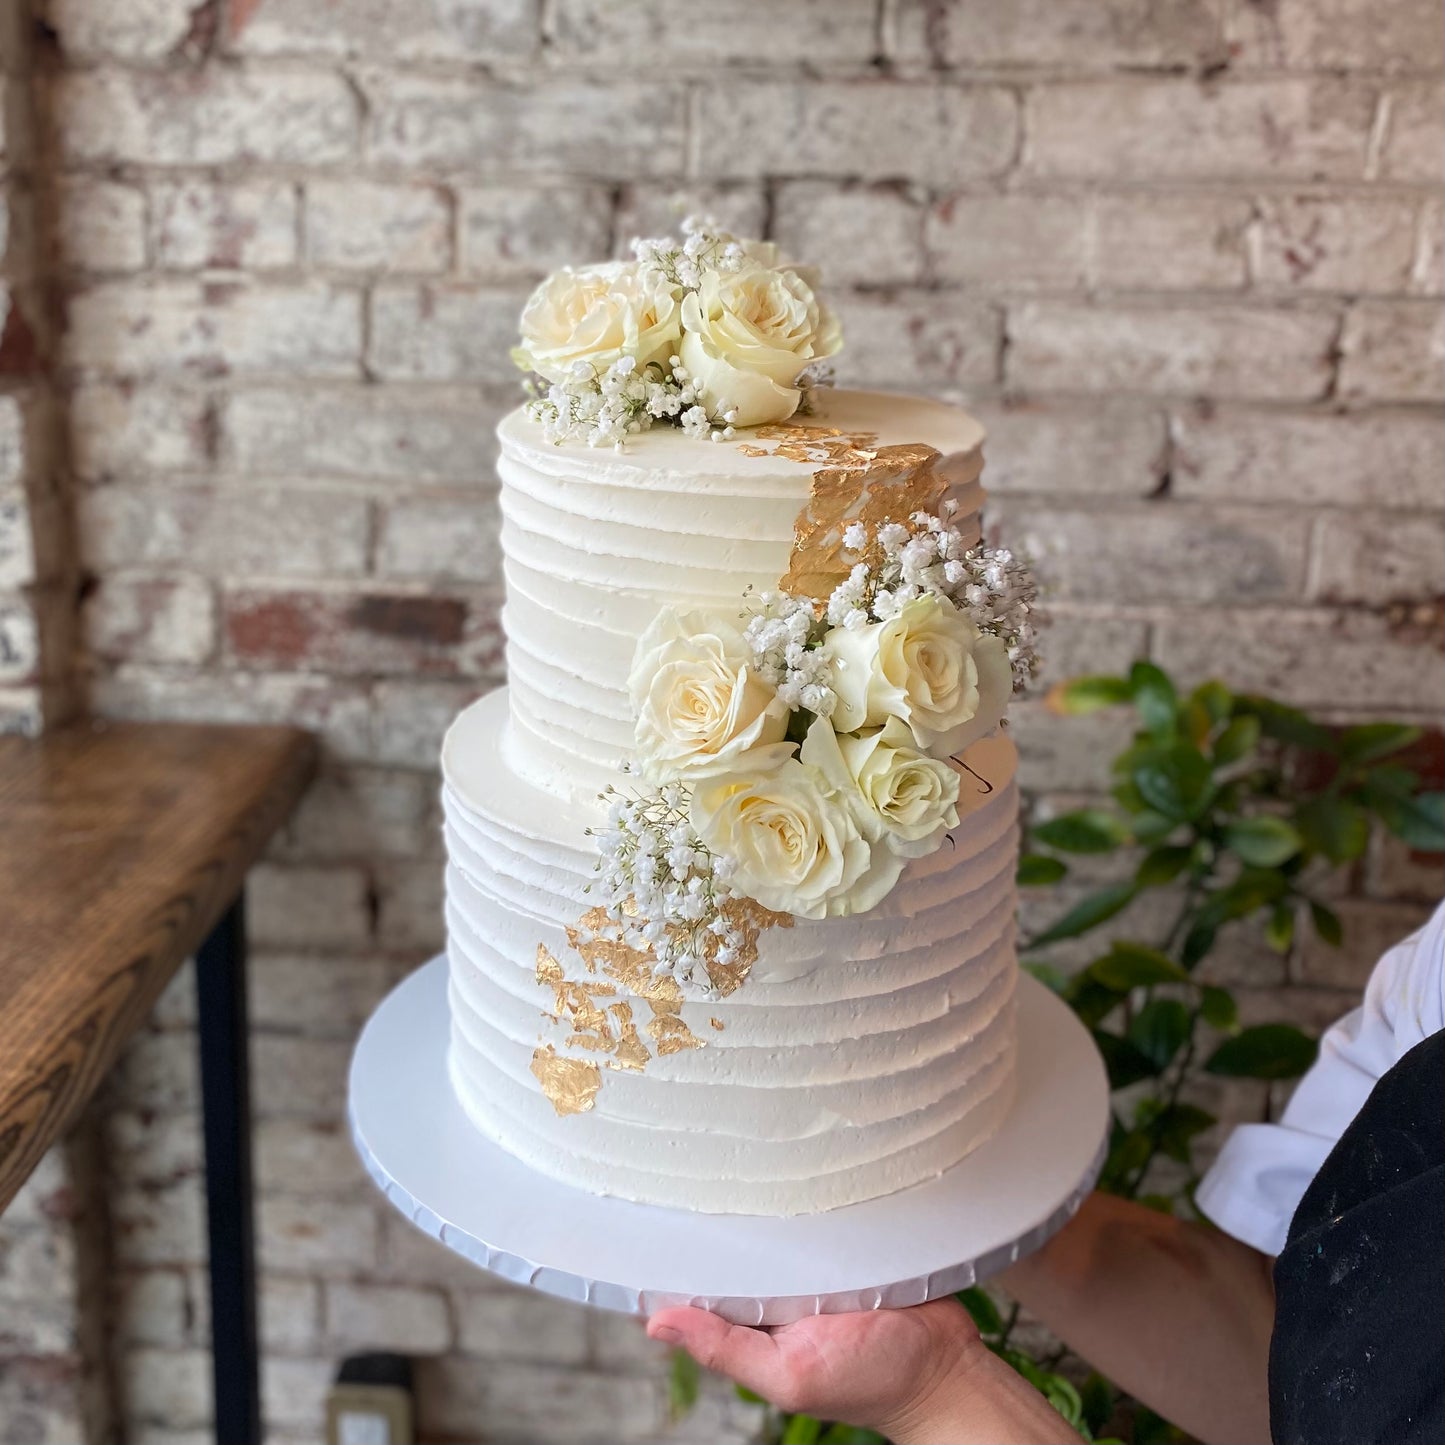 Two-tiered white wedding cake with fresh flowers